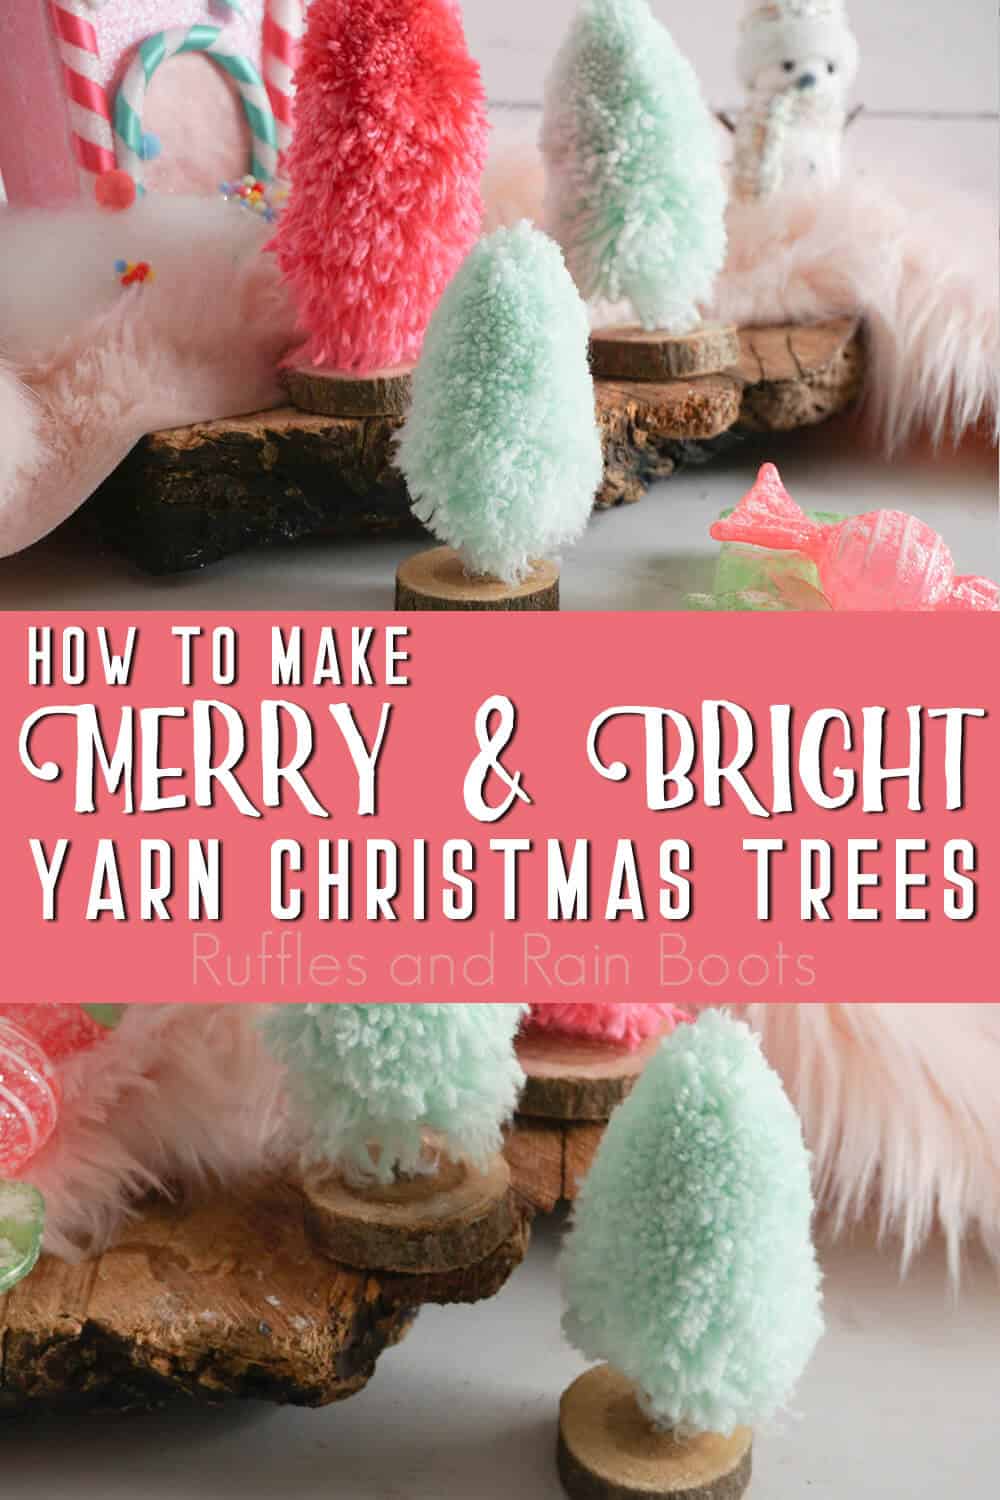 photo collage of yarn tree alternative to bottlebrush trees with text which reads how to make merry & bright yarn christmas trees